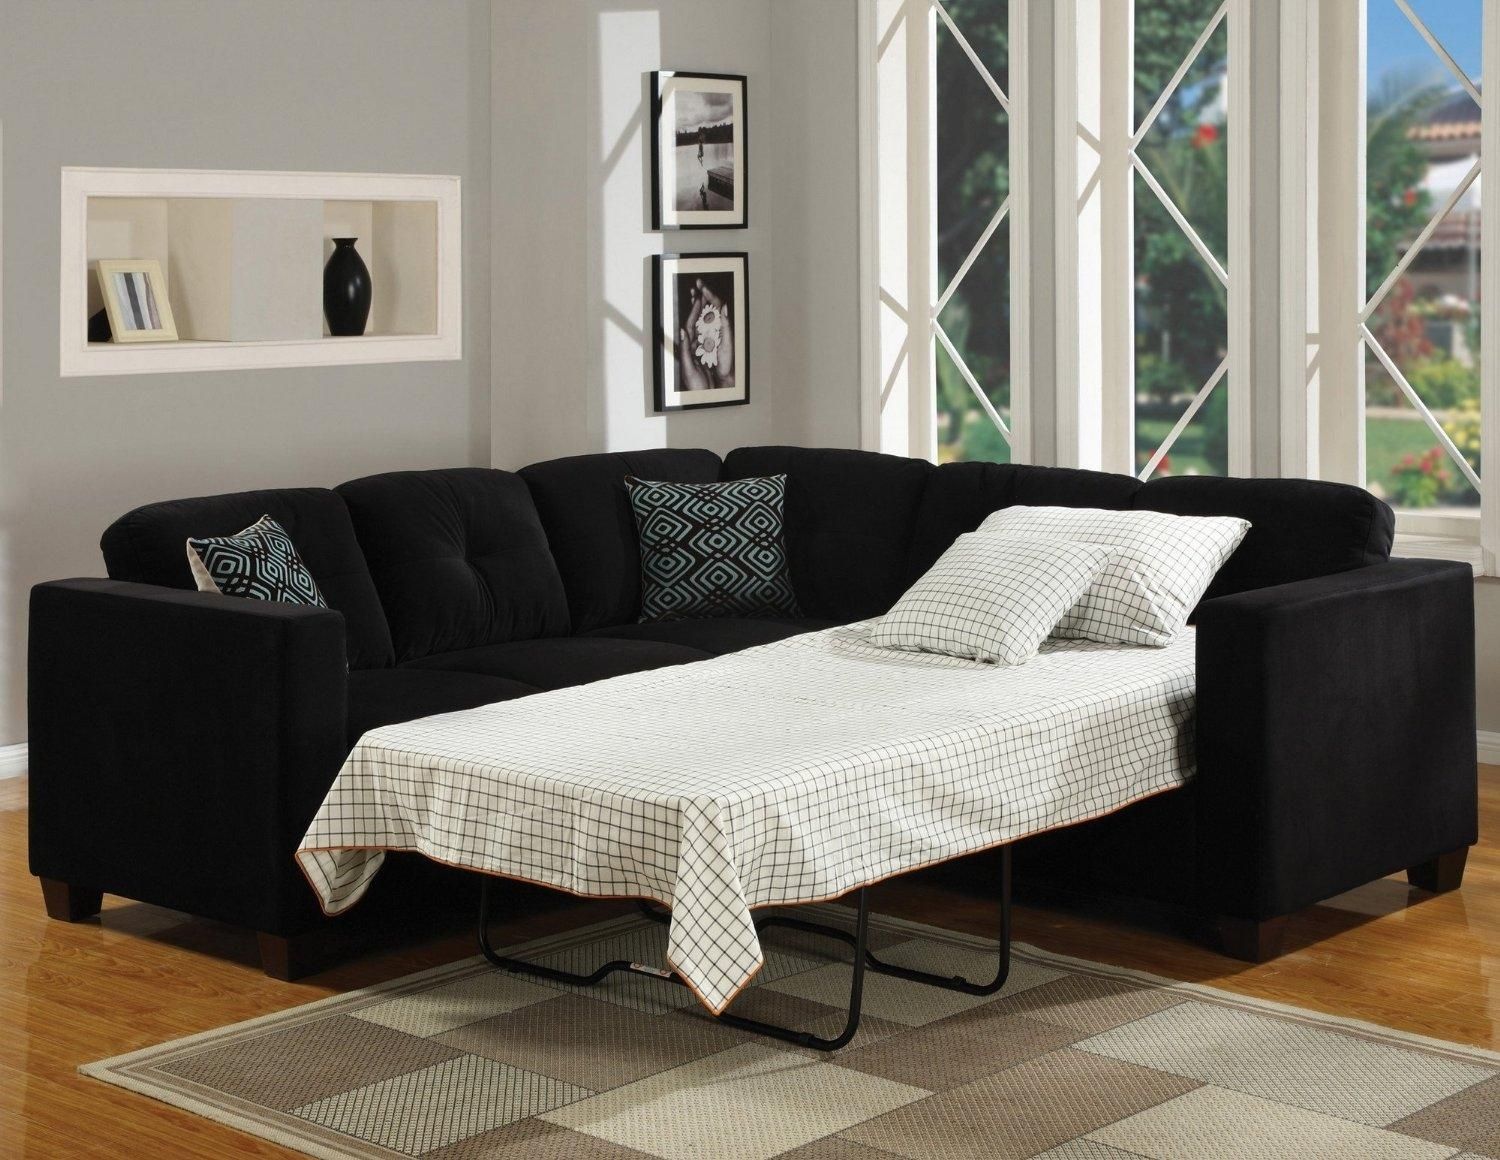 Sofas Center : Sectional Sleeper Sofas For Sale Small Spaces With With Regard To Sectional Sofas For Small Spaces With Recliners (View 14 of 20)